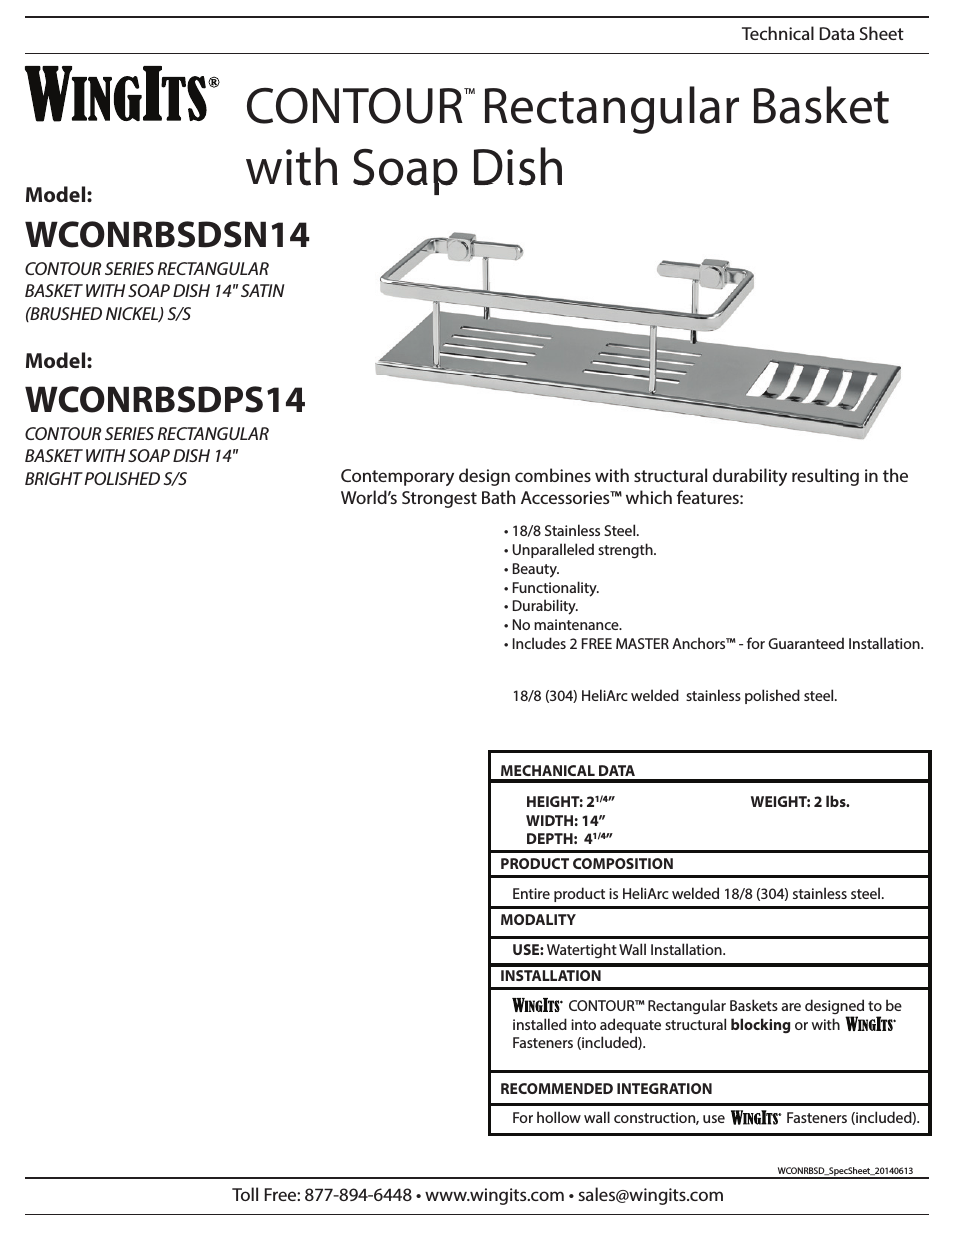 CONTOUR Basket with Soap Dish WCONRBSD